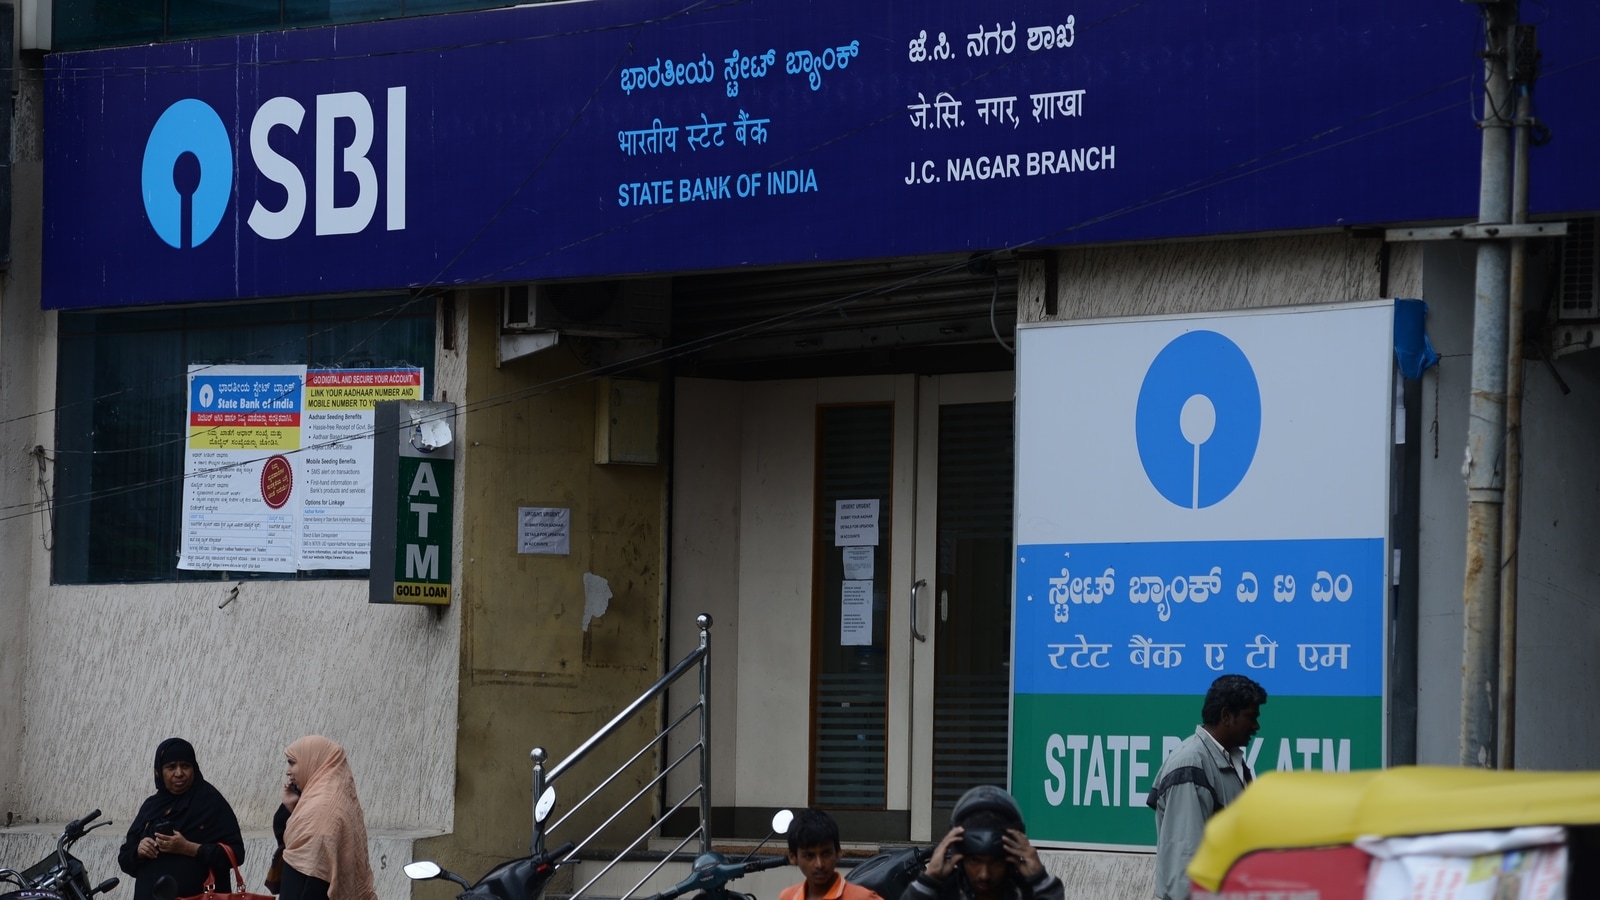 SBI recruitment: 11 vacancies of specialist cadre officer on offer, details here